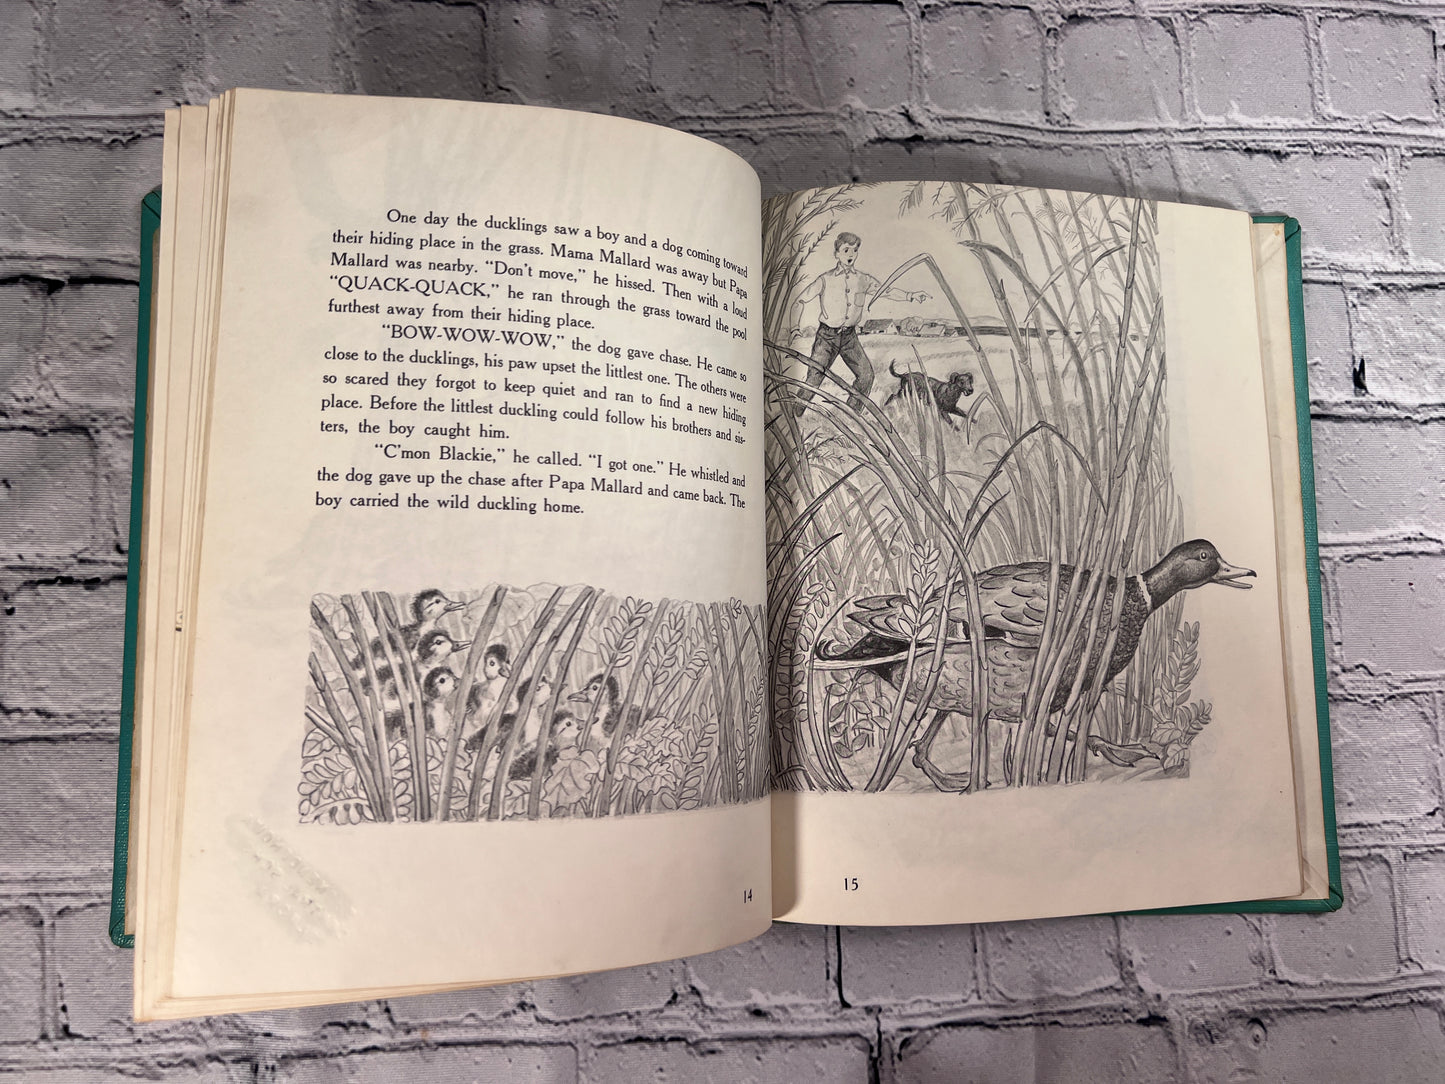 Quack Quack the story of a little wild duck By Berta And Elmer Hader [1961 · 1st Printing]